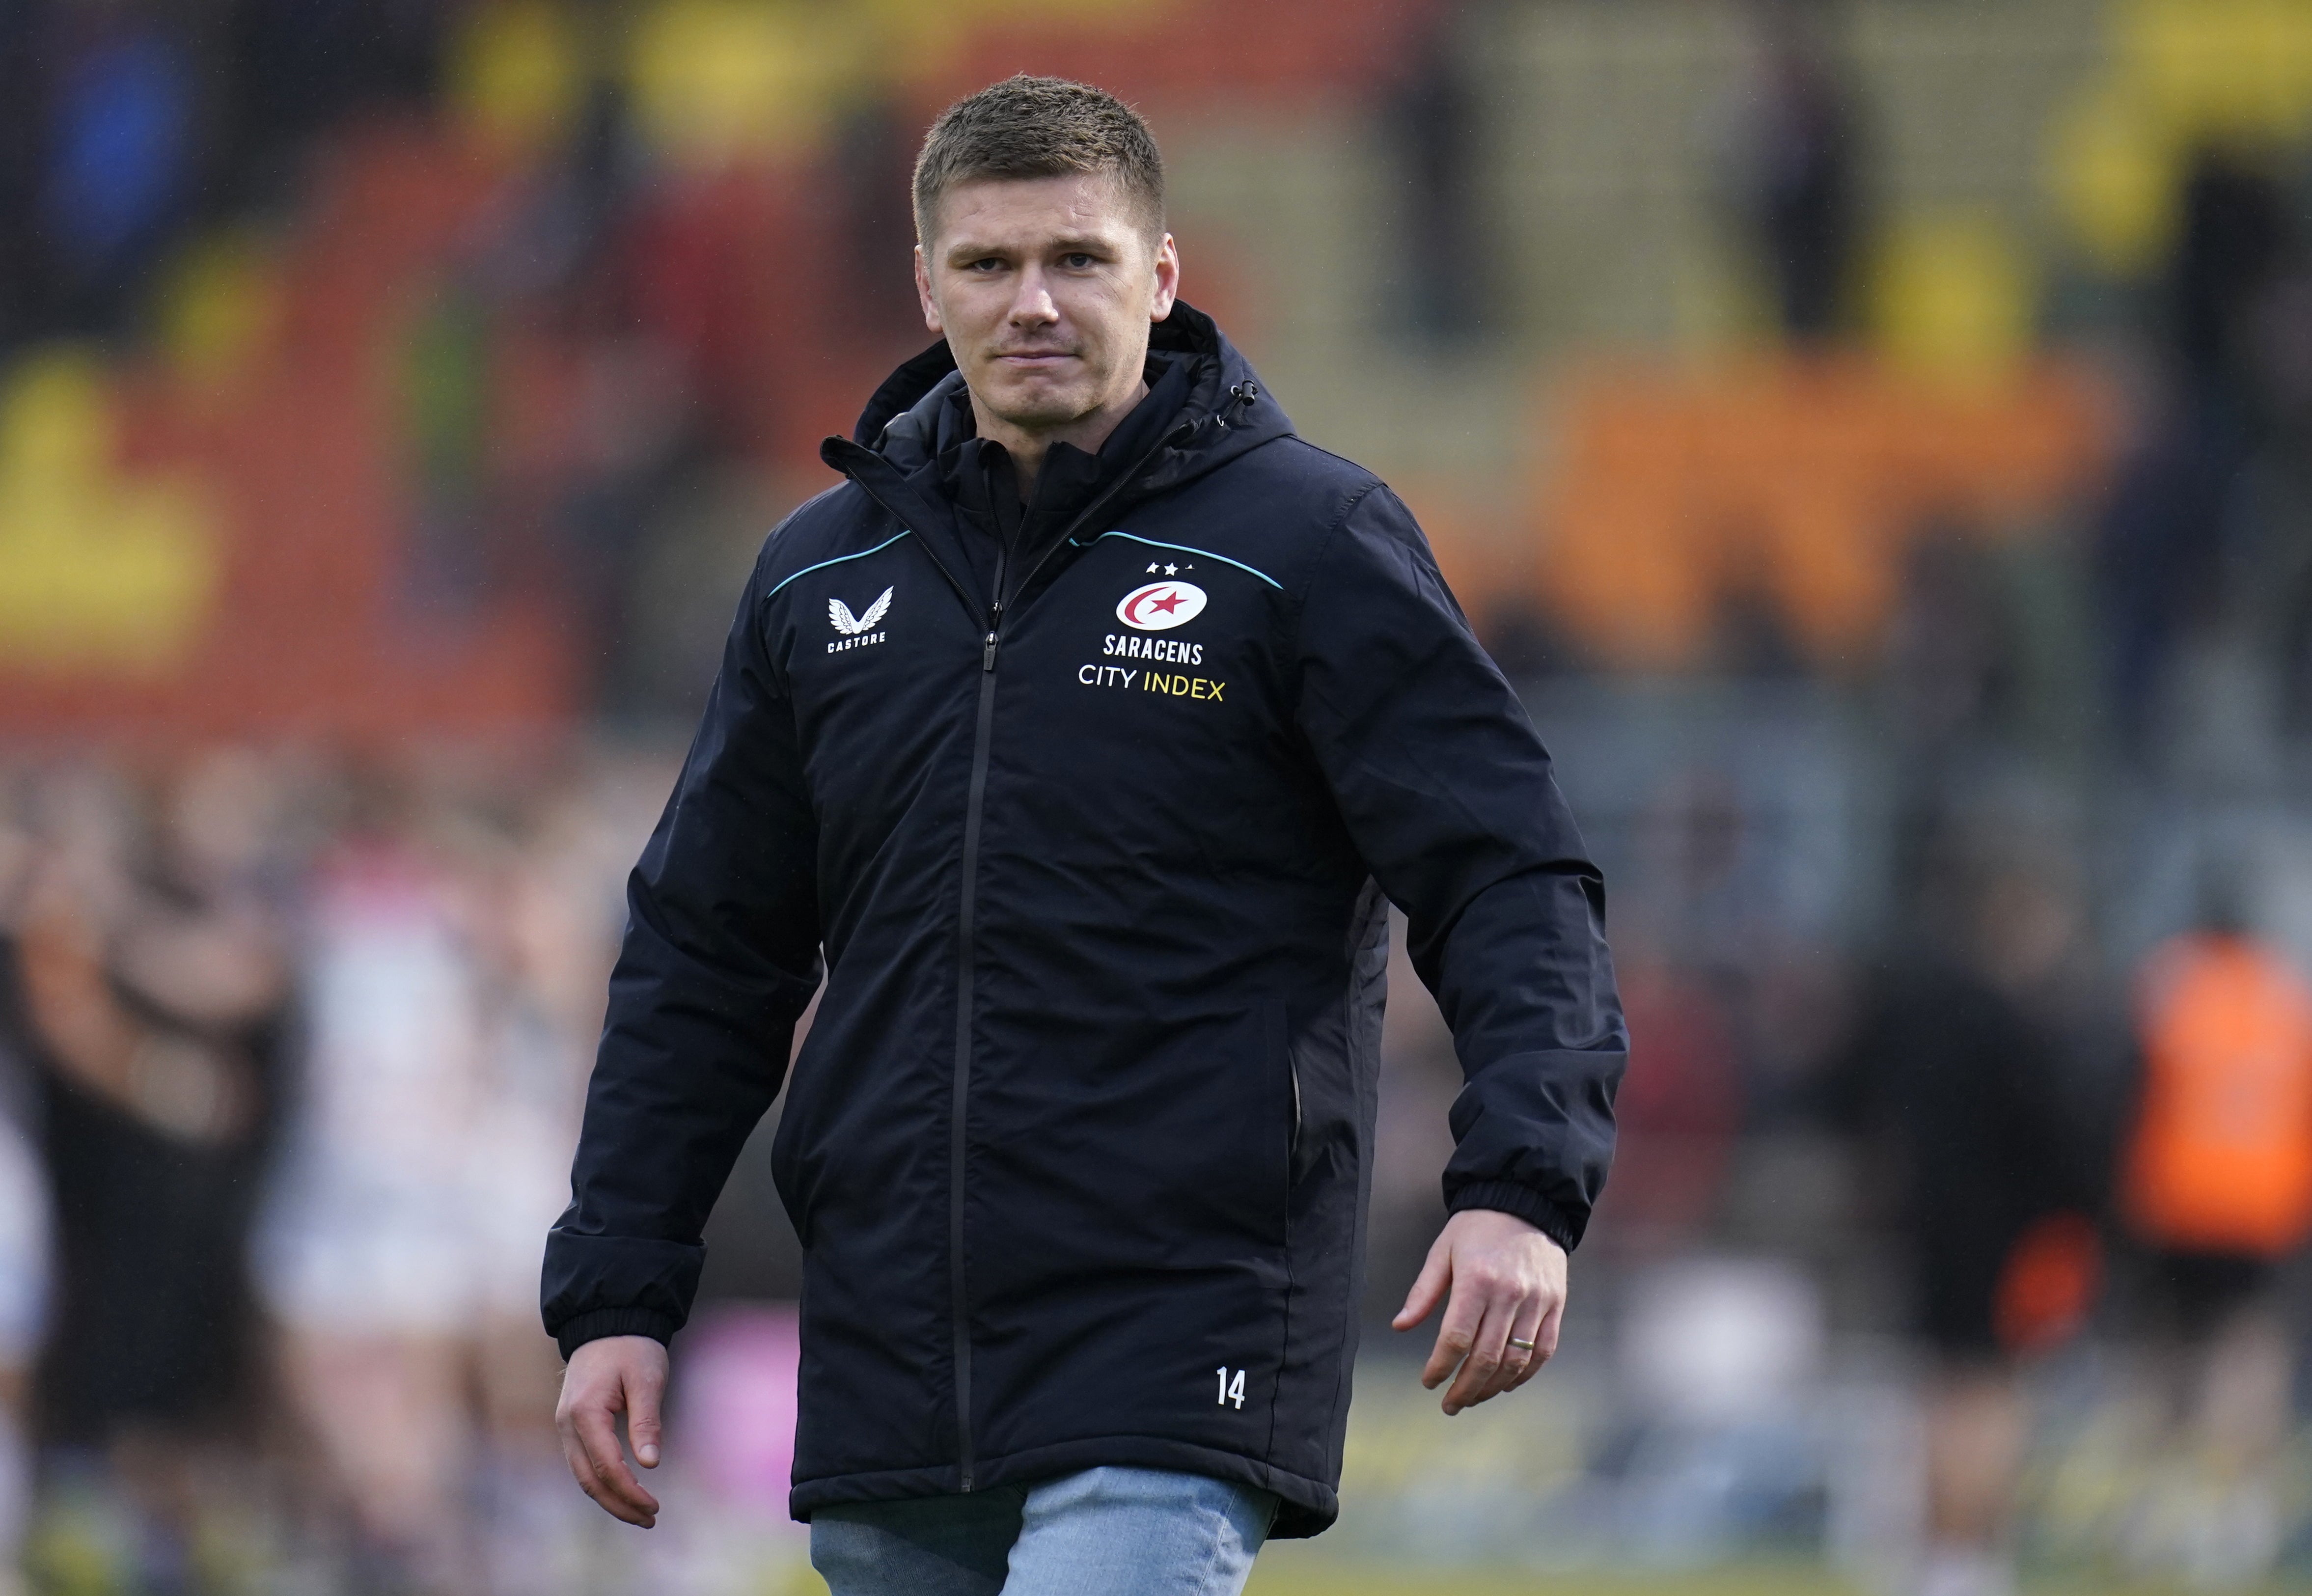 Owen Farrell has been ruled out of Saracens’ match against Sale (Andrew Matthews/PA)